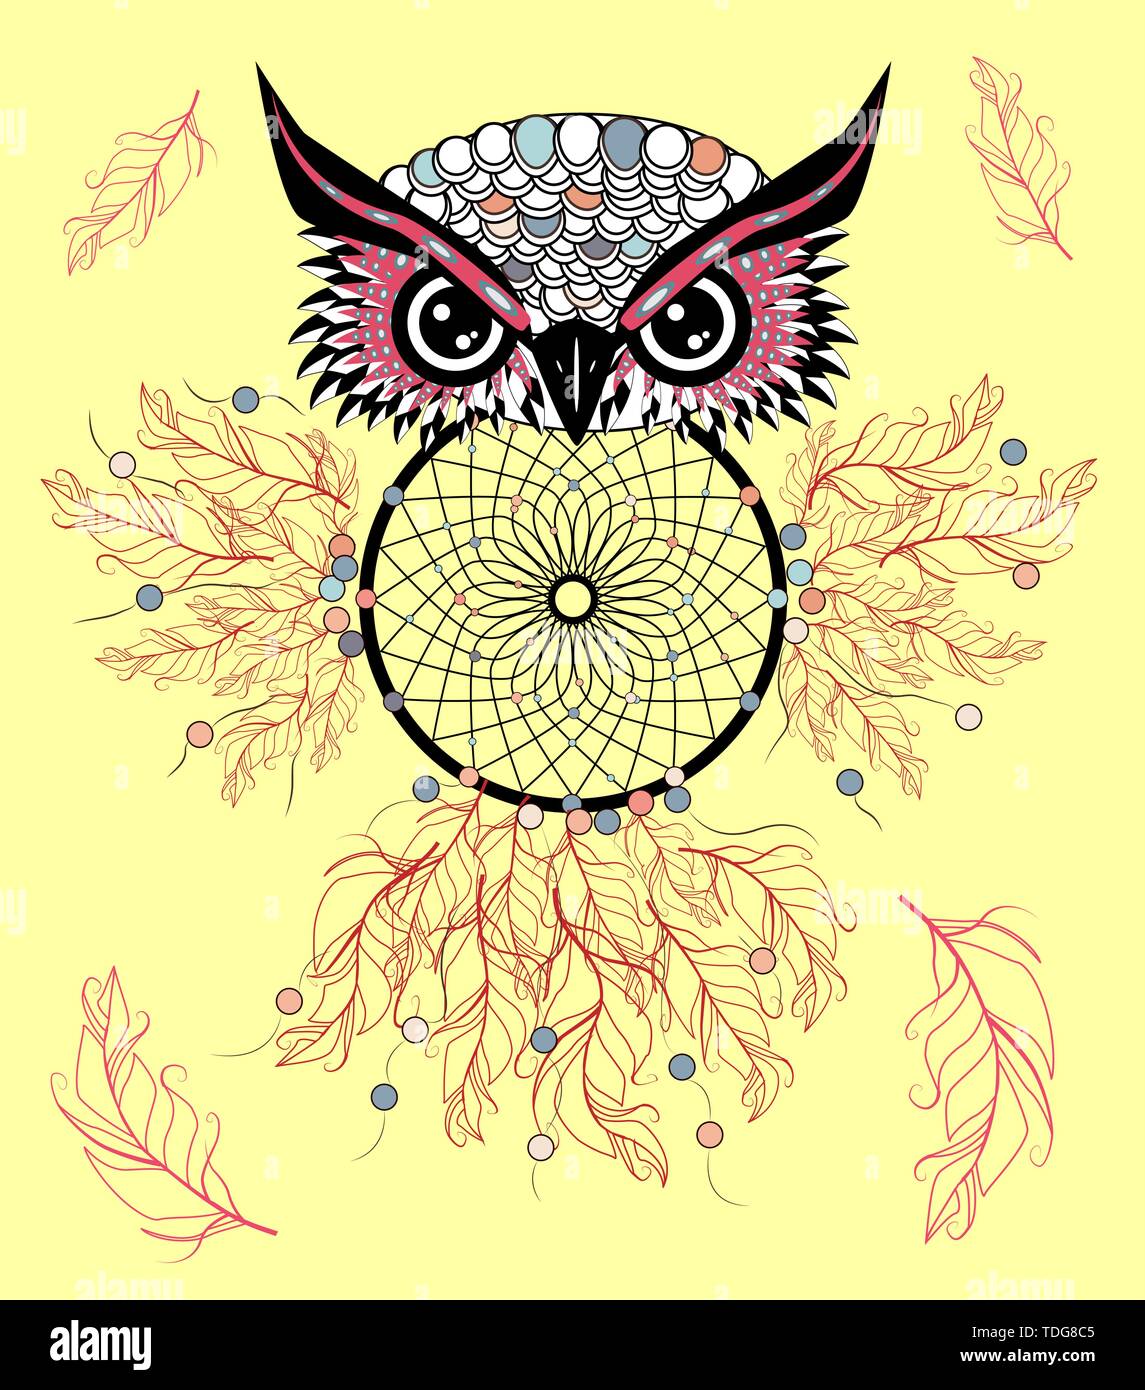 60 Best Owl Tattoo Designs And Ideas For Men And Women